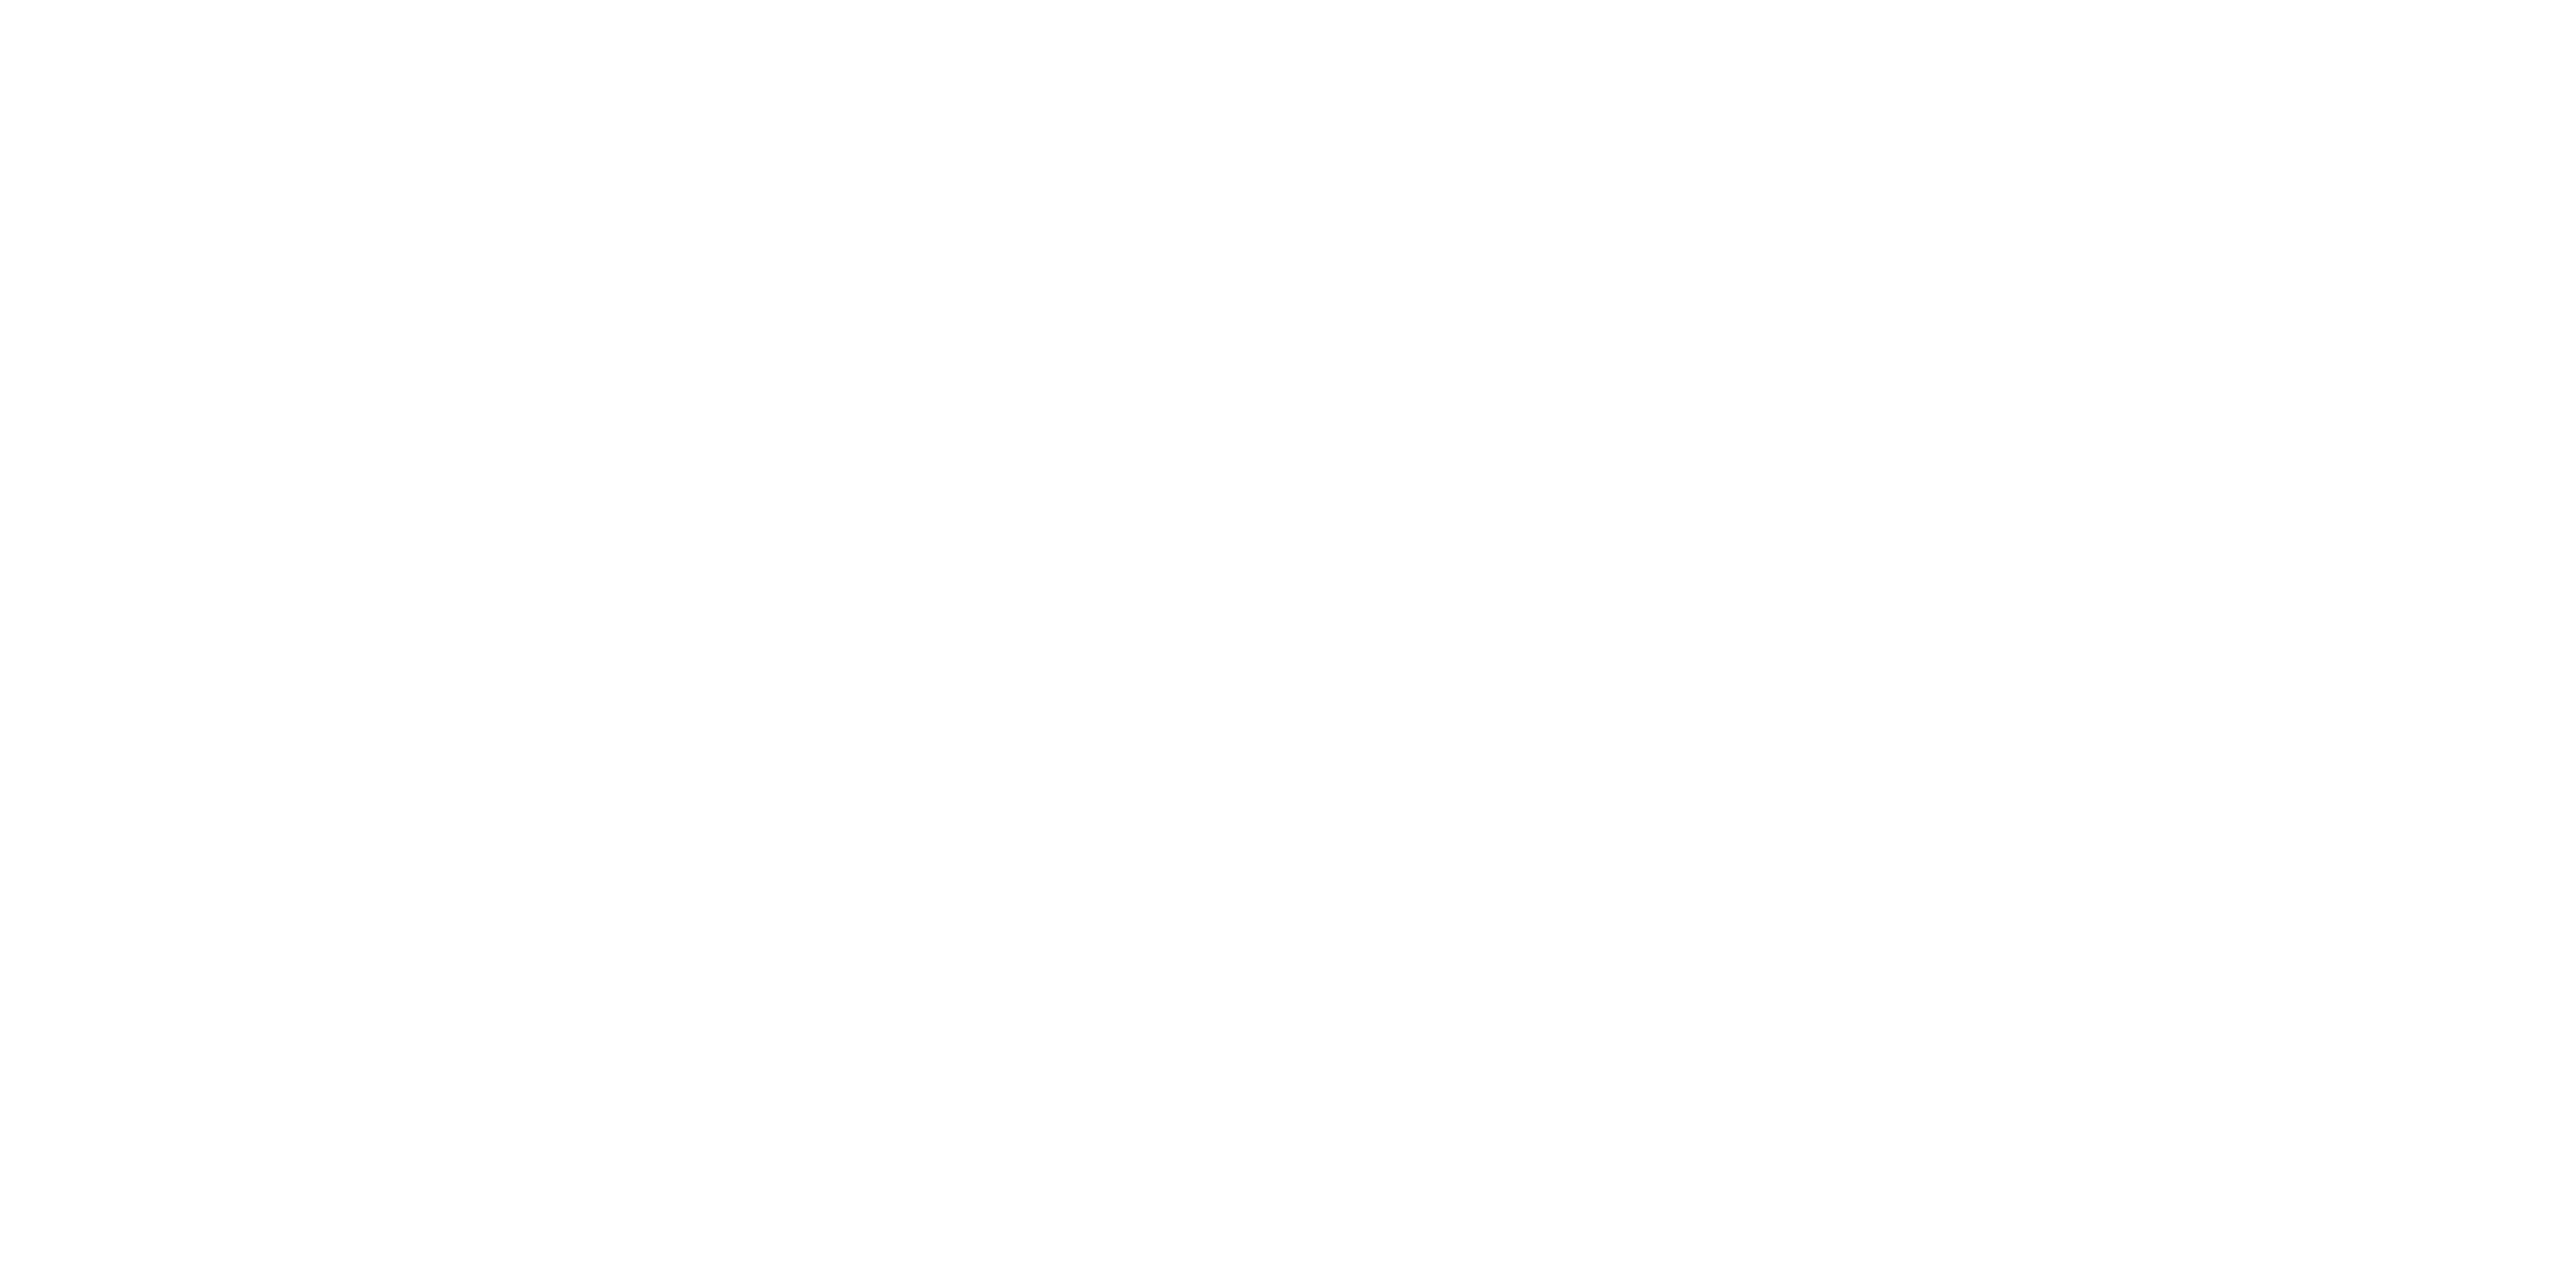 ProTect Painters A Neighborly Company logo in white featuring the brand paint brush logo.